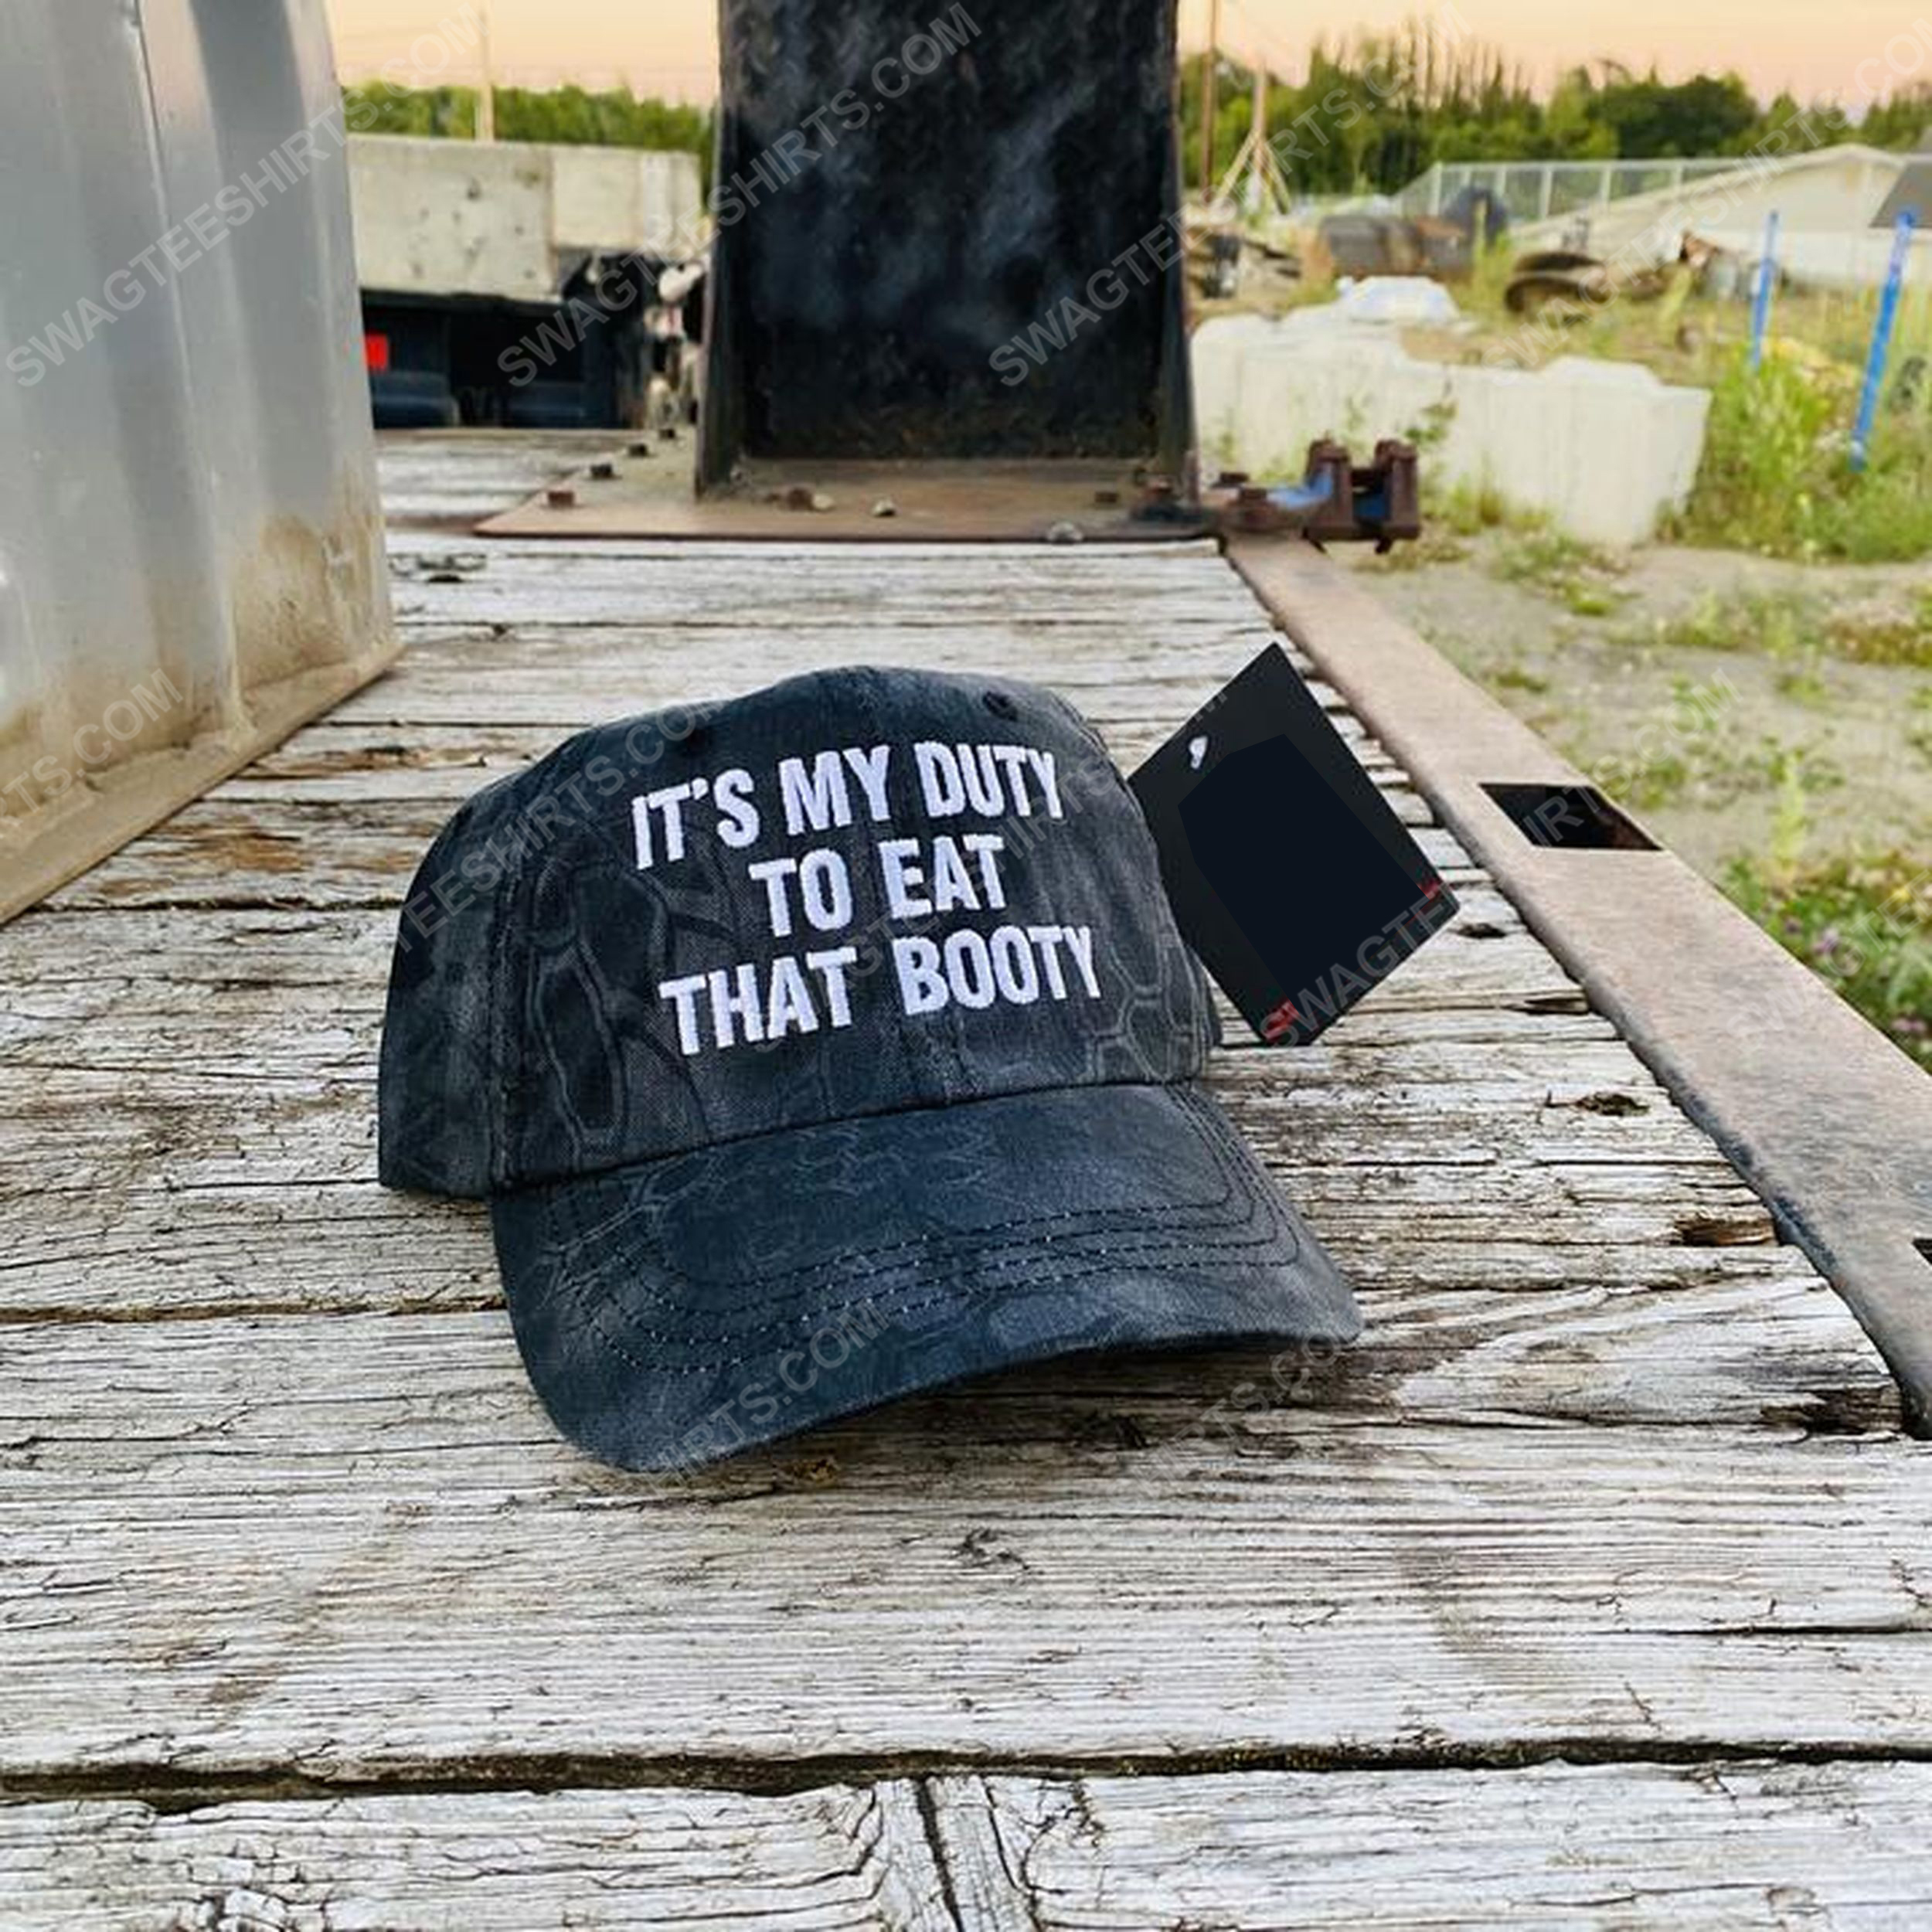 It's my duty to eat that booty full print classic hat 1 - Copy (2)